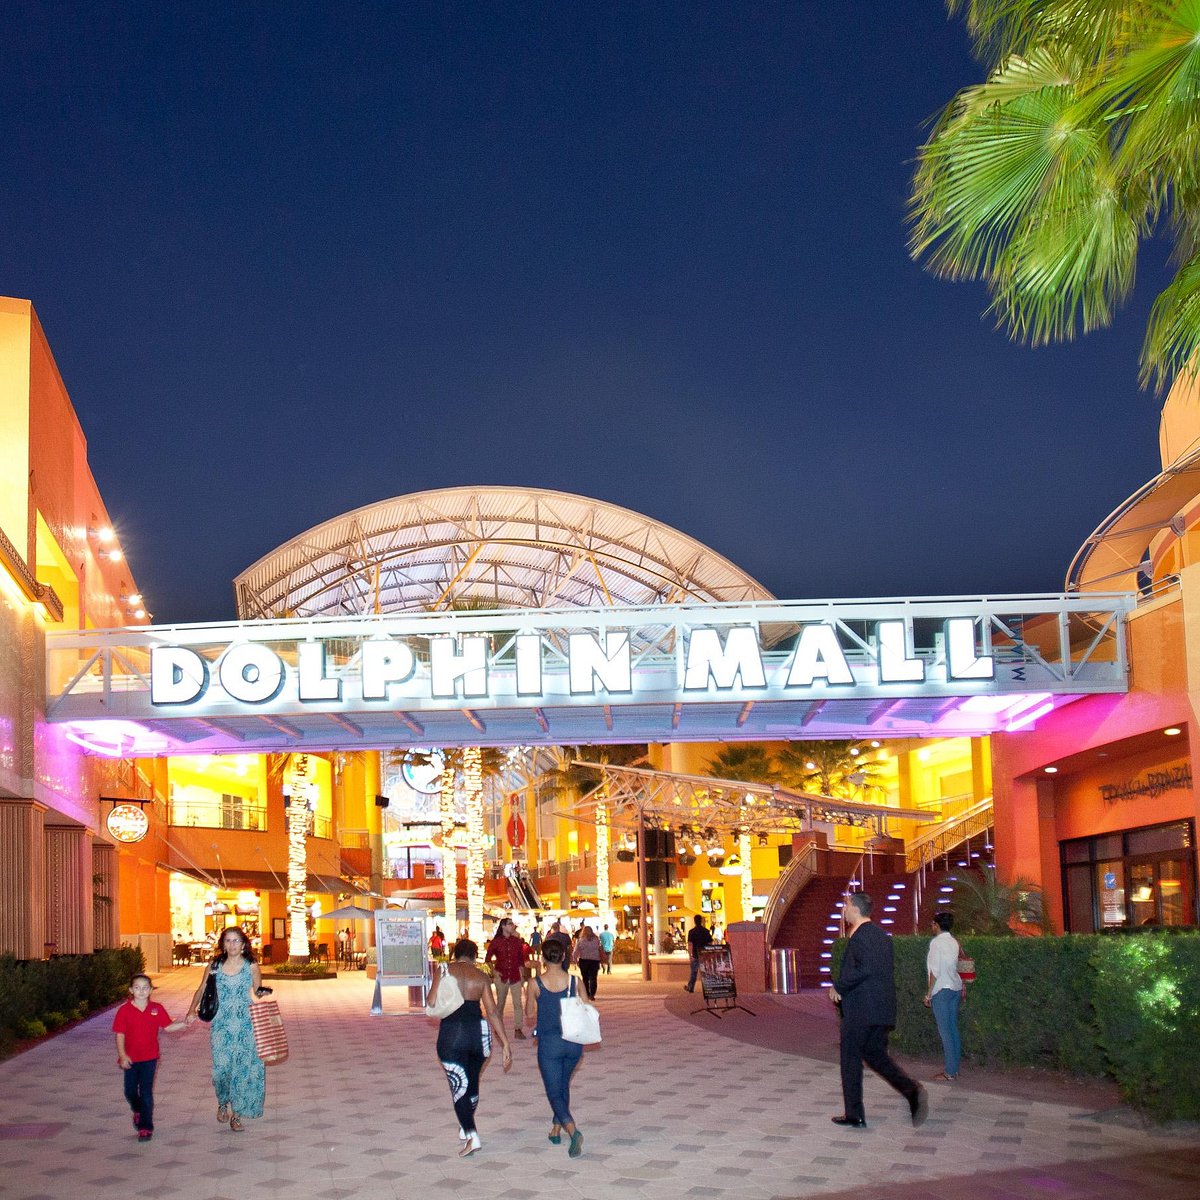 Dolphin Mall - Happy Holidays from Dolphin Mall! 🎄 Stores are